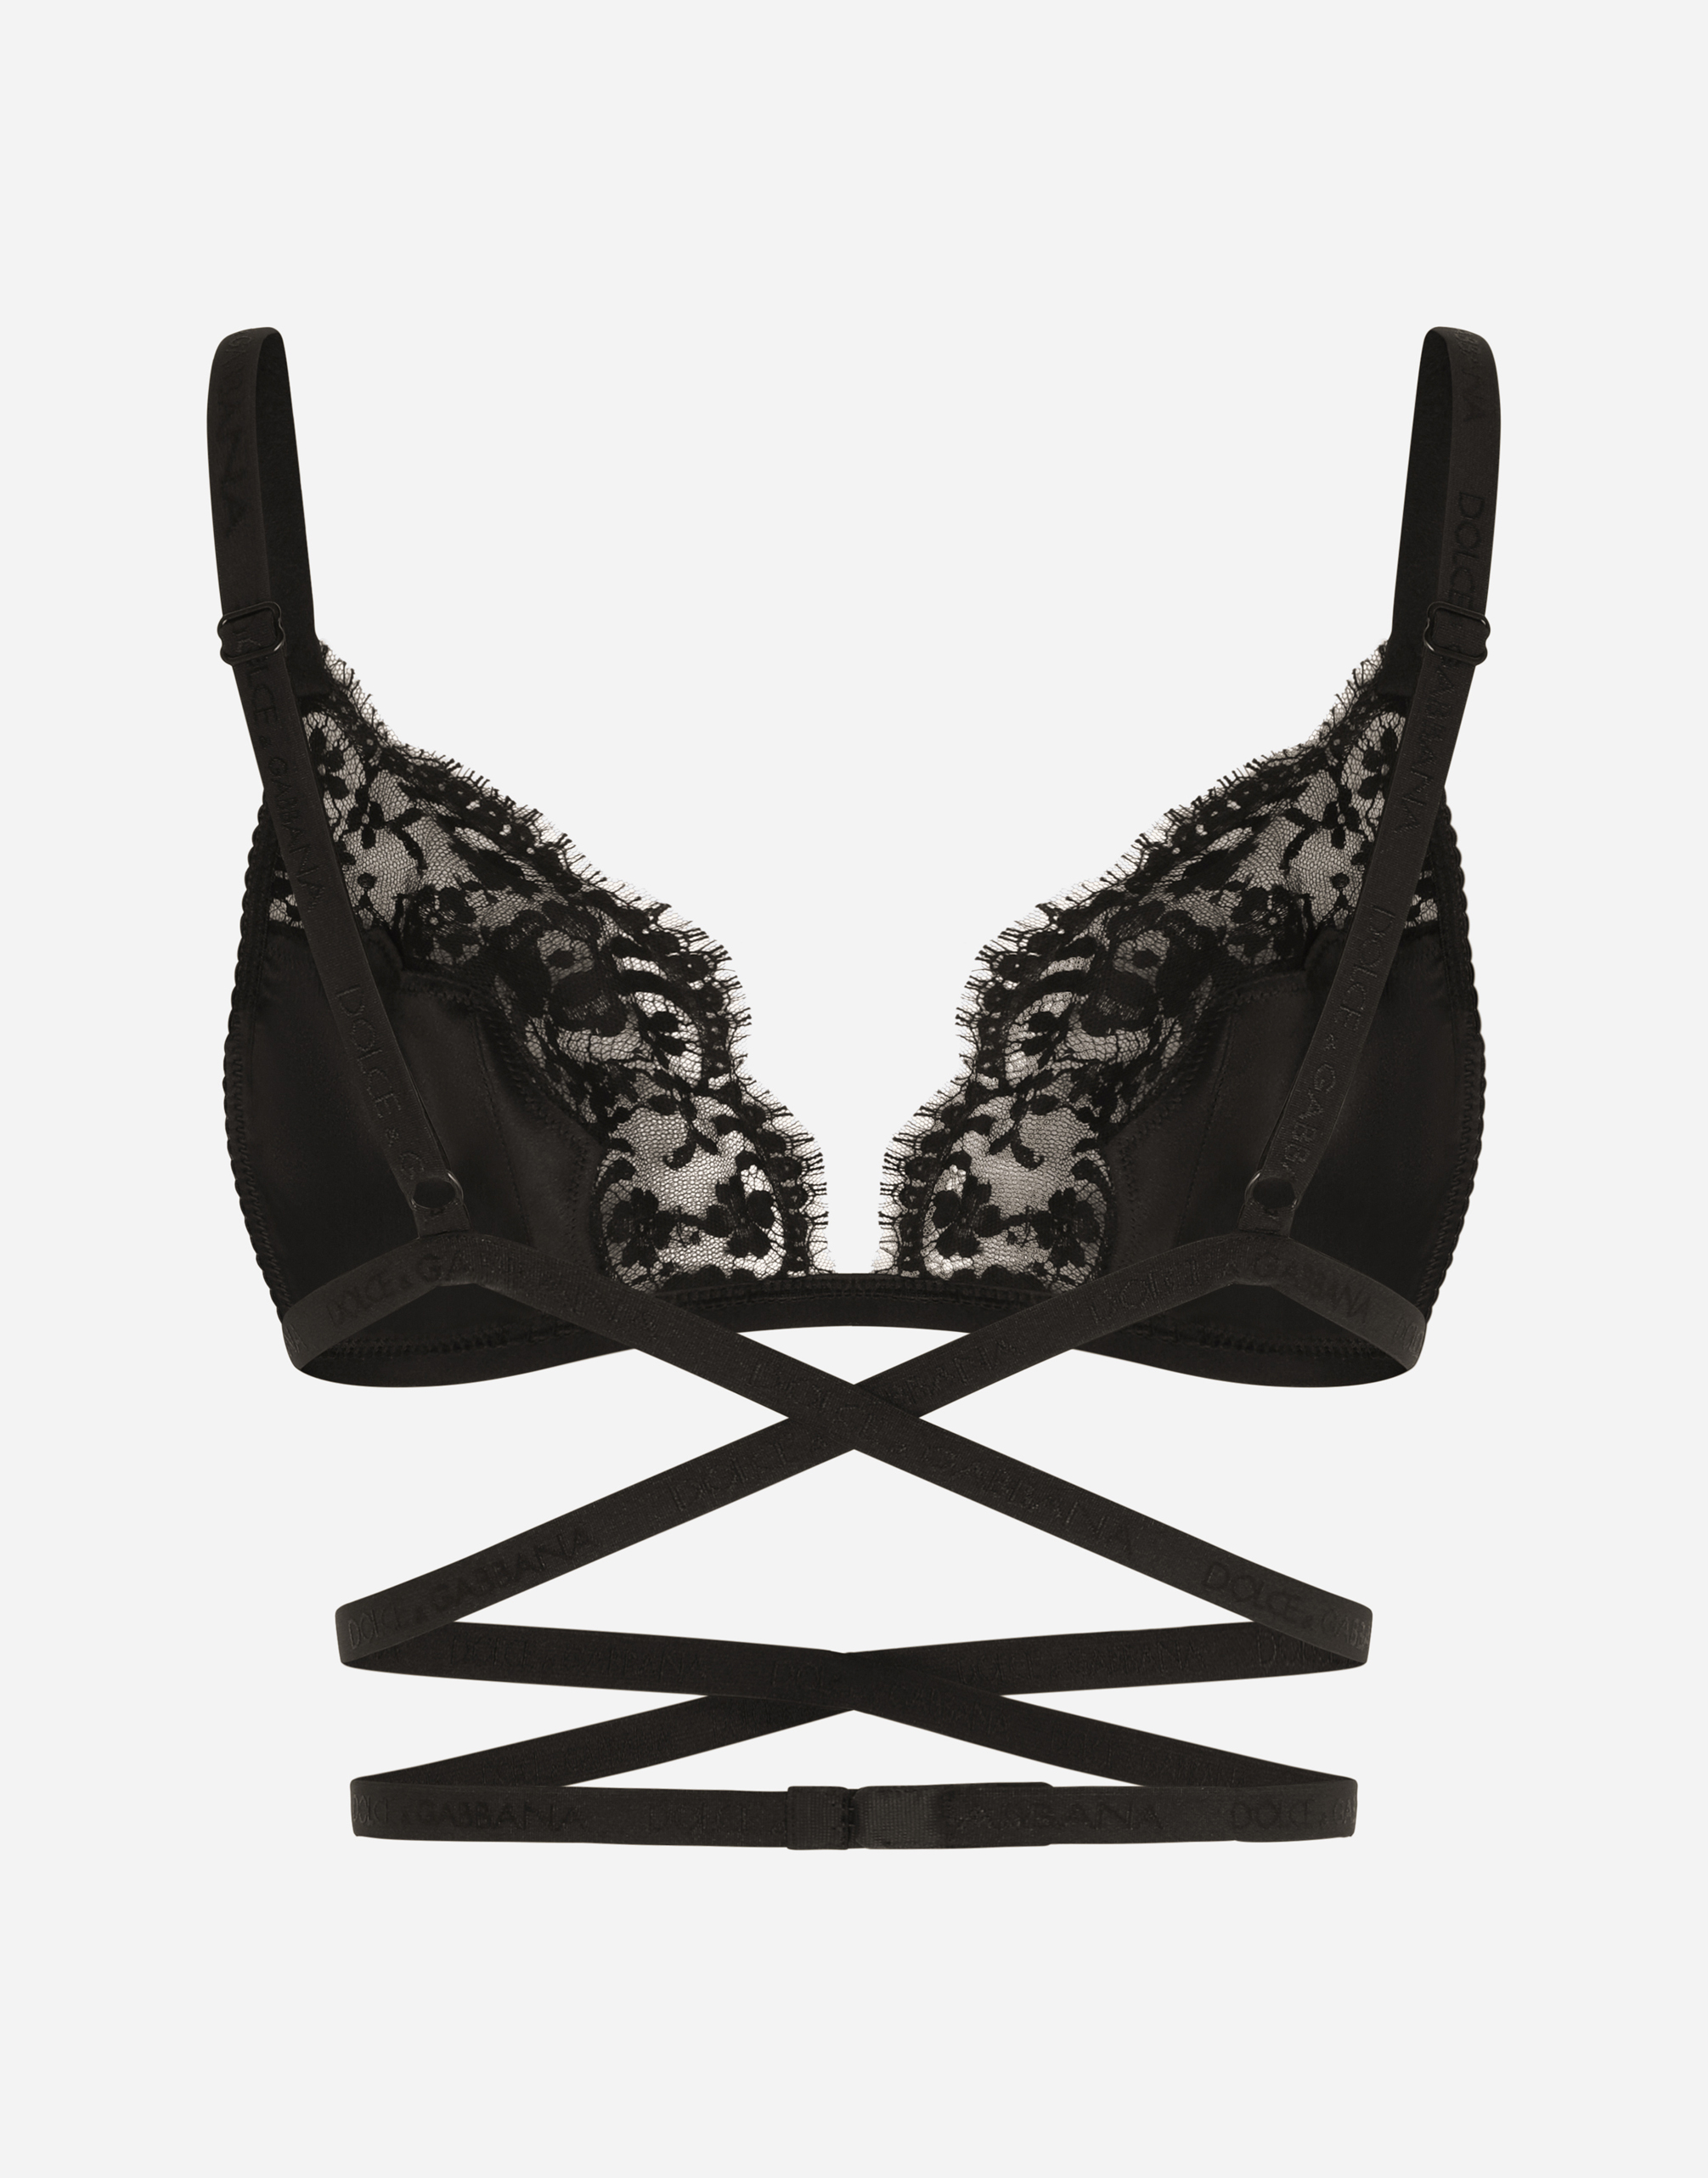 Satin and lace triangle bra in Black for Women